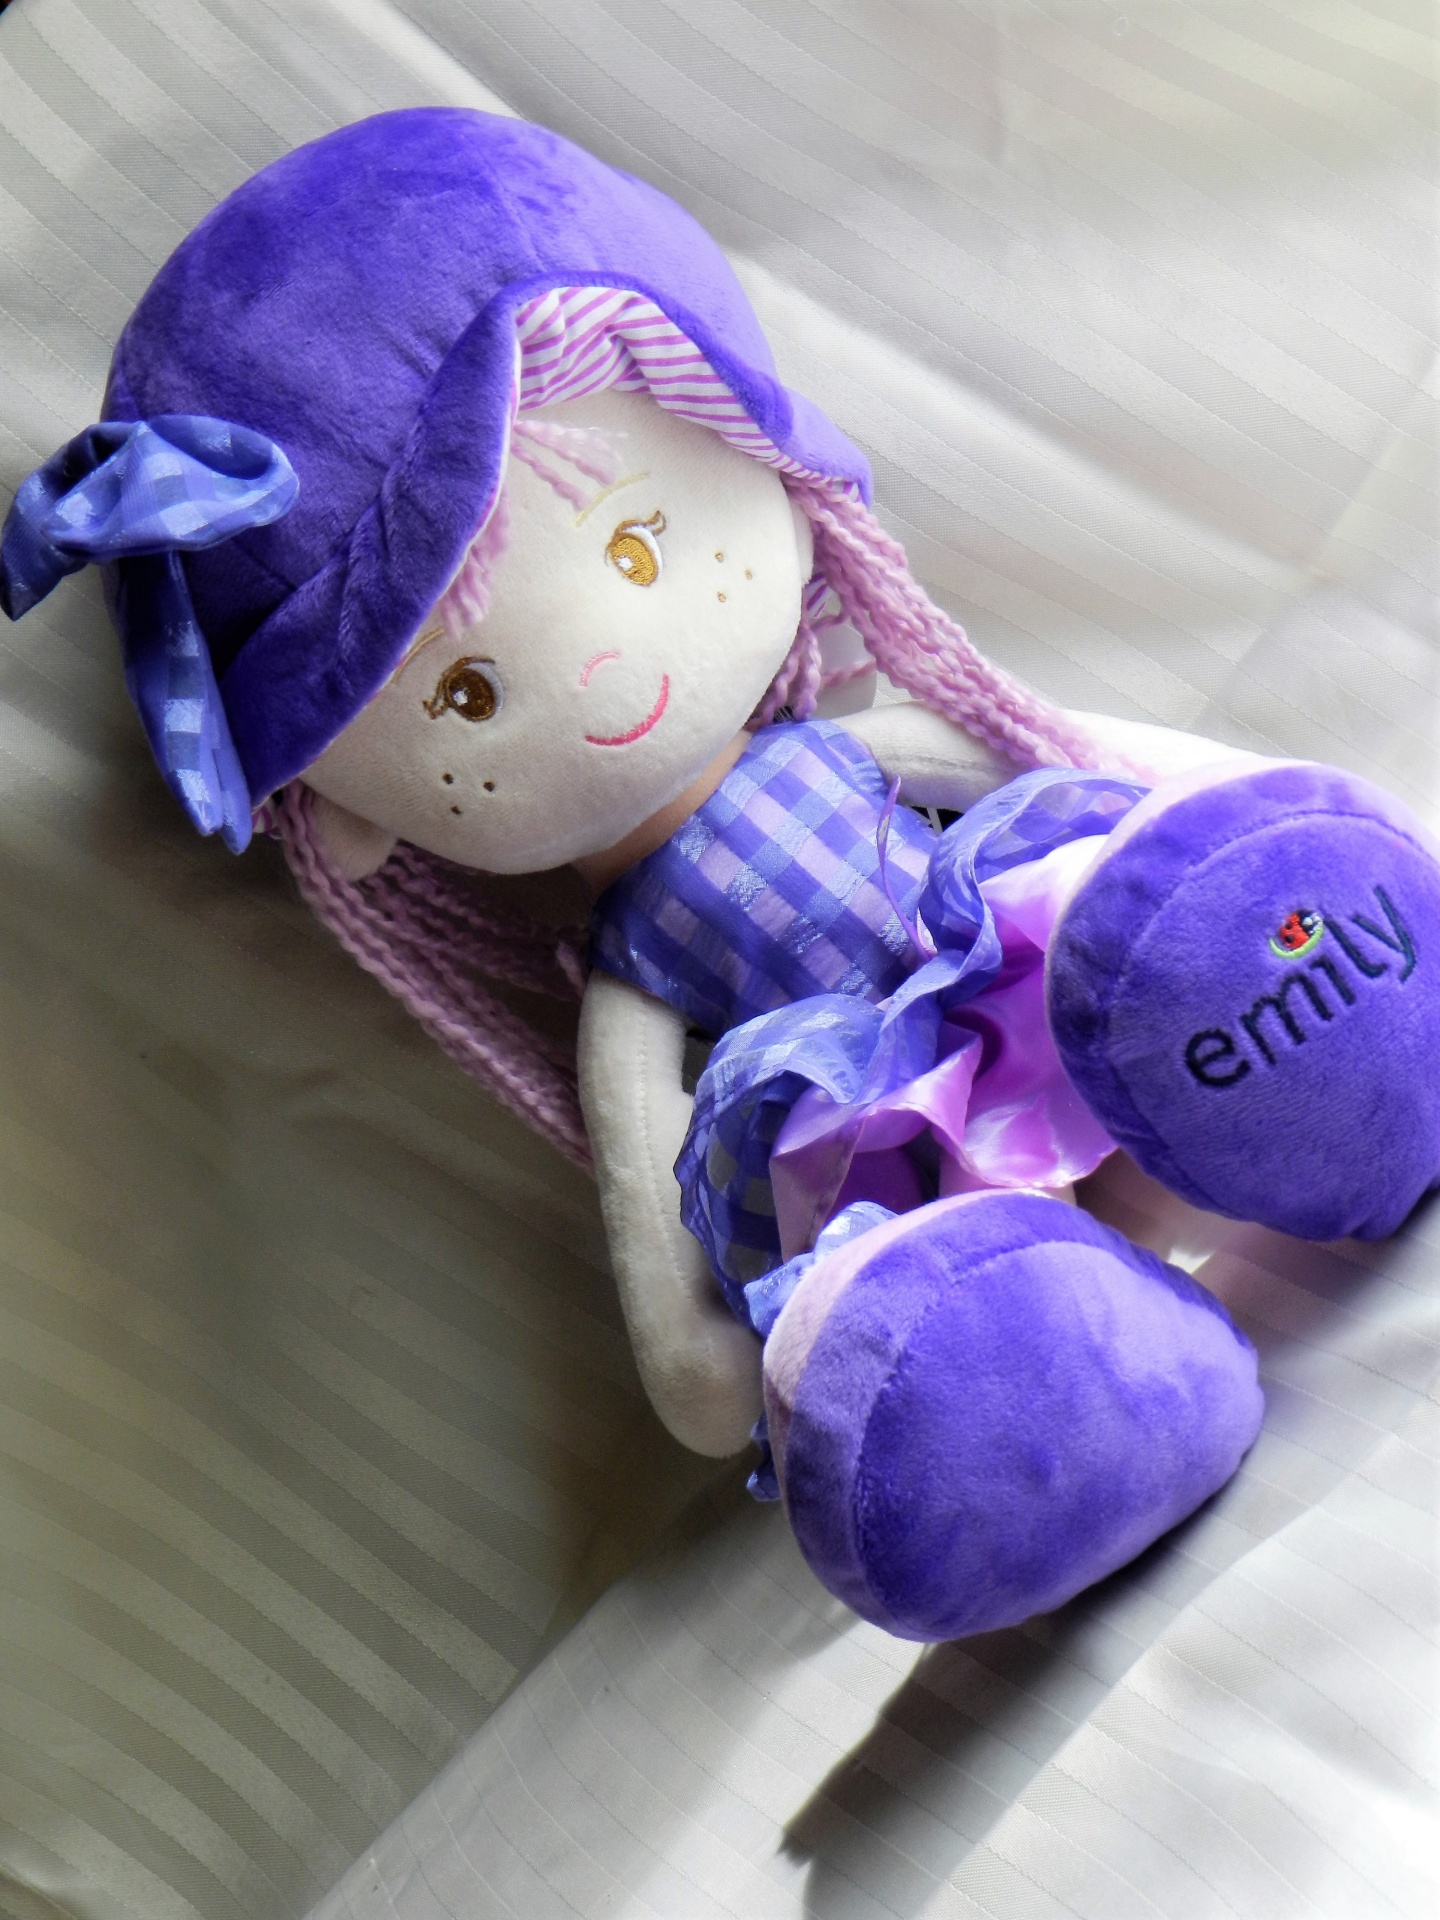 Stylized photo of a purple and pink rag doll